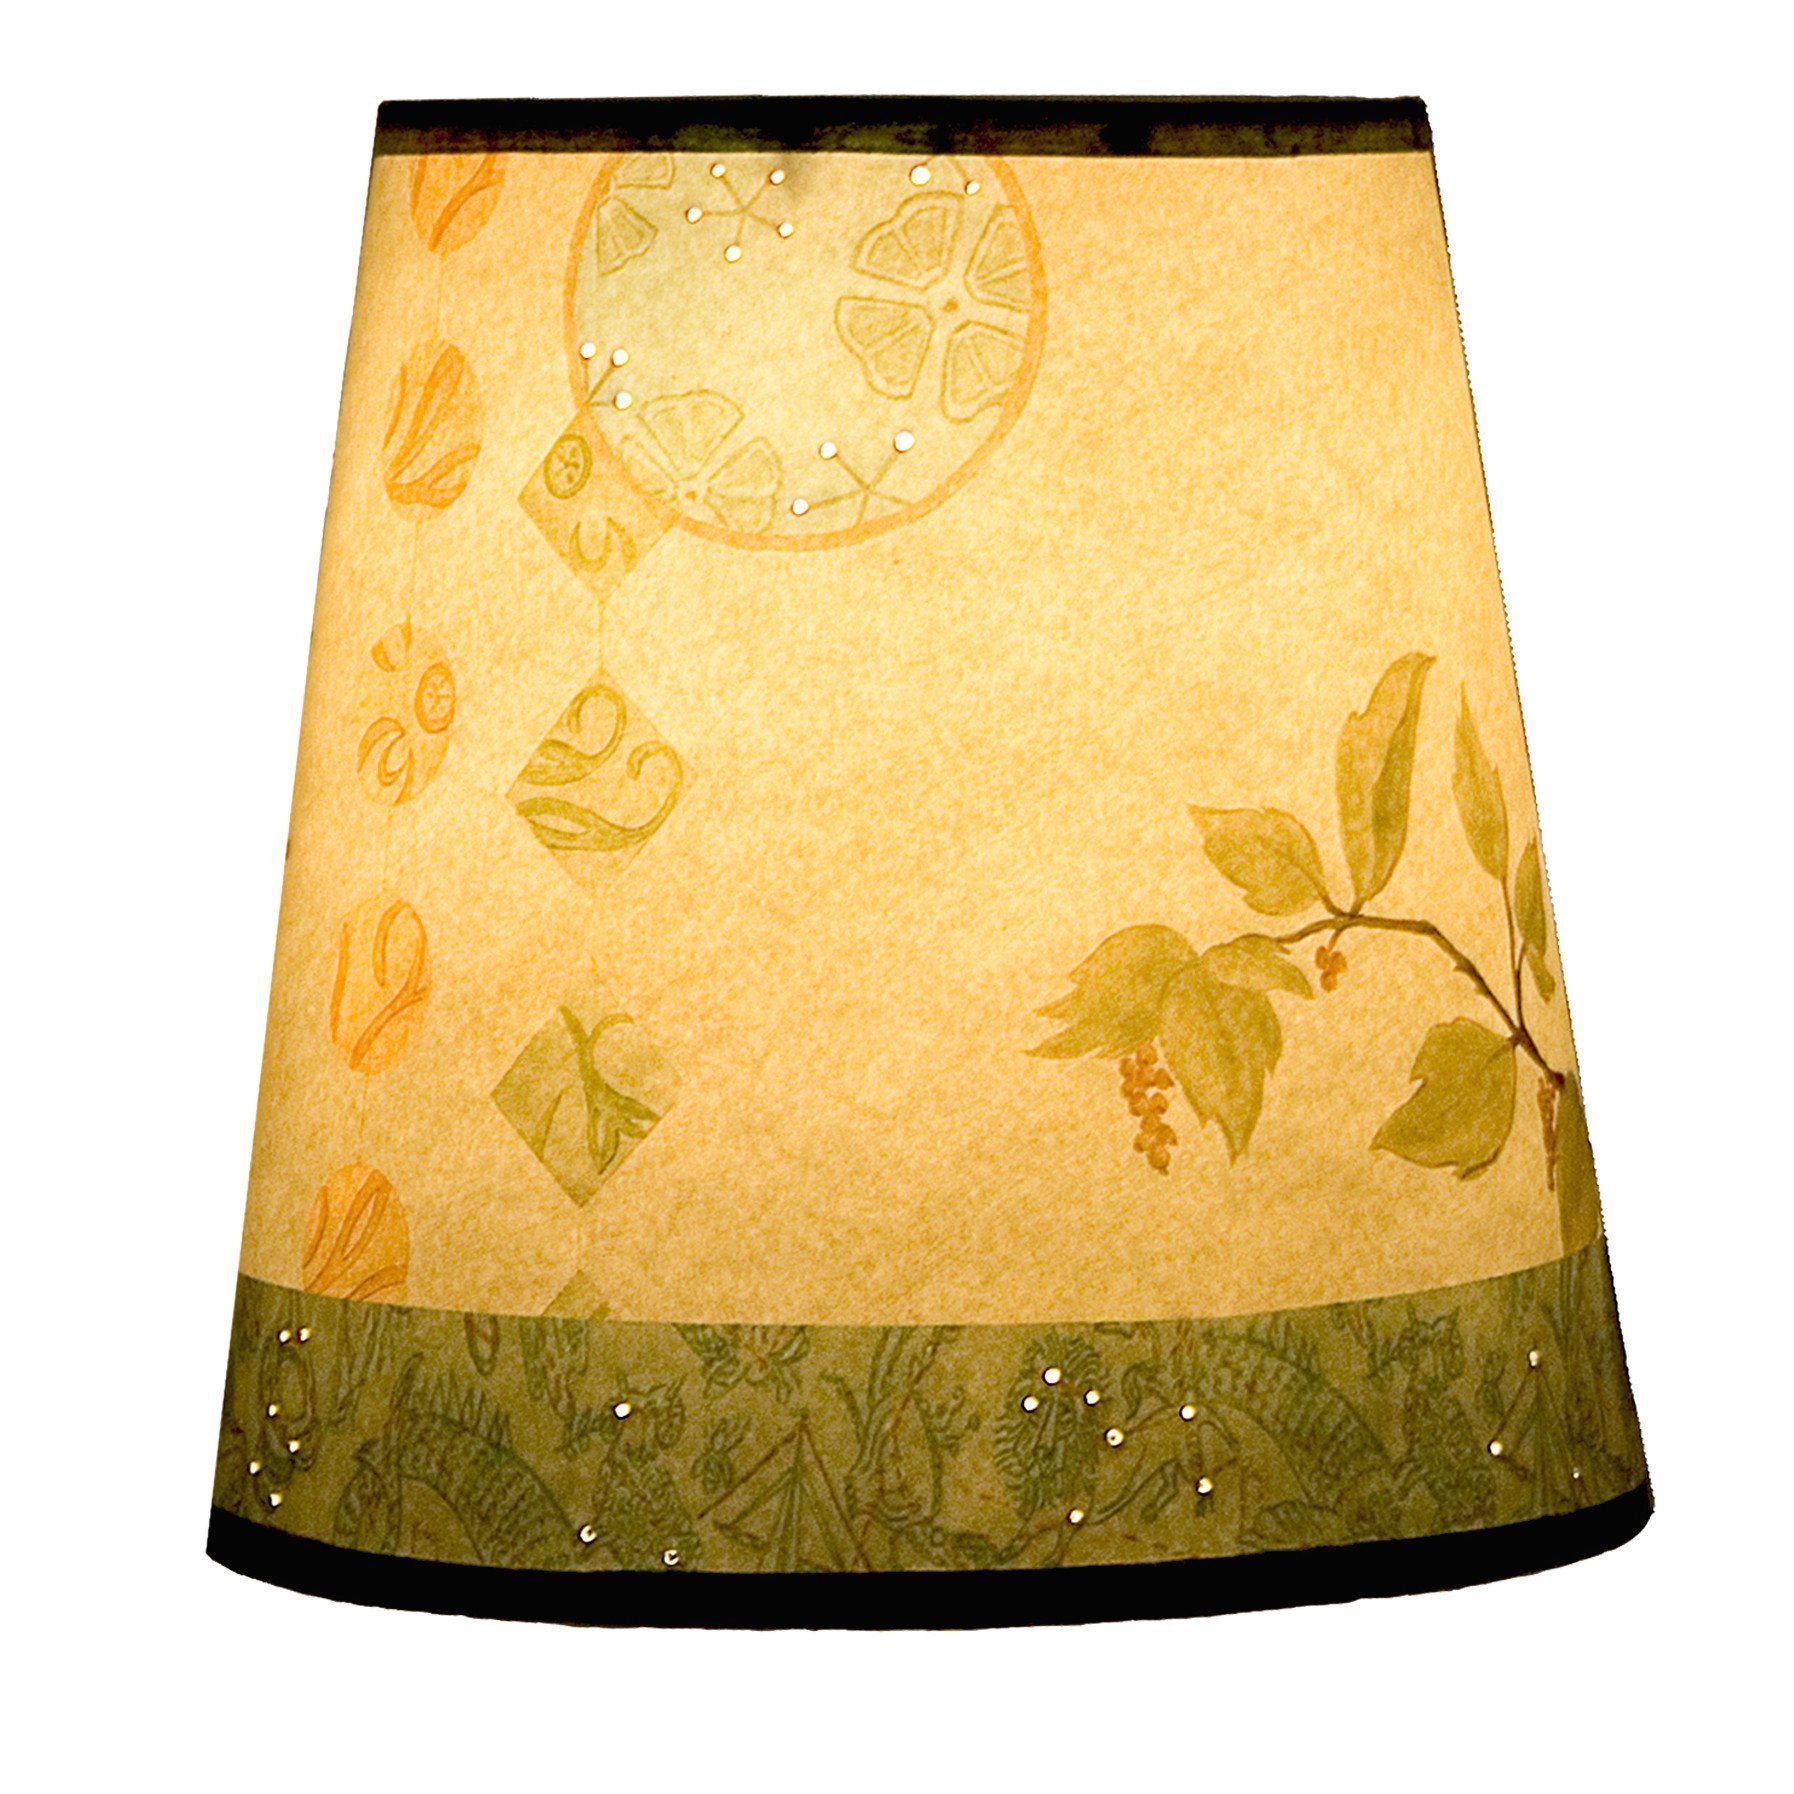 Janna Ugone & Co Lamp Shades Small Drum Lamp Shade in Celestial Leaf